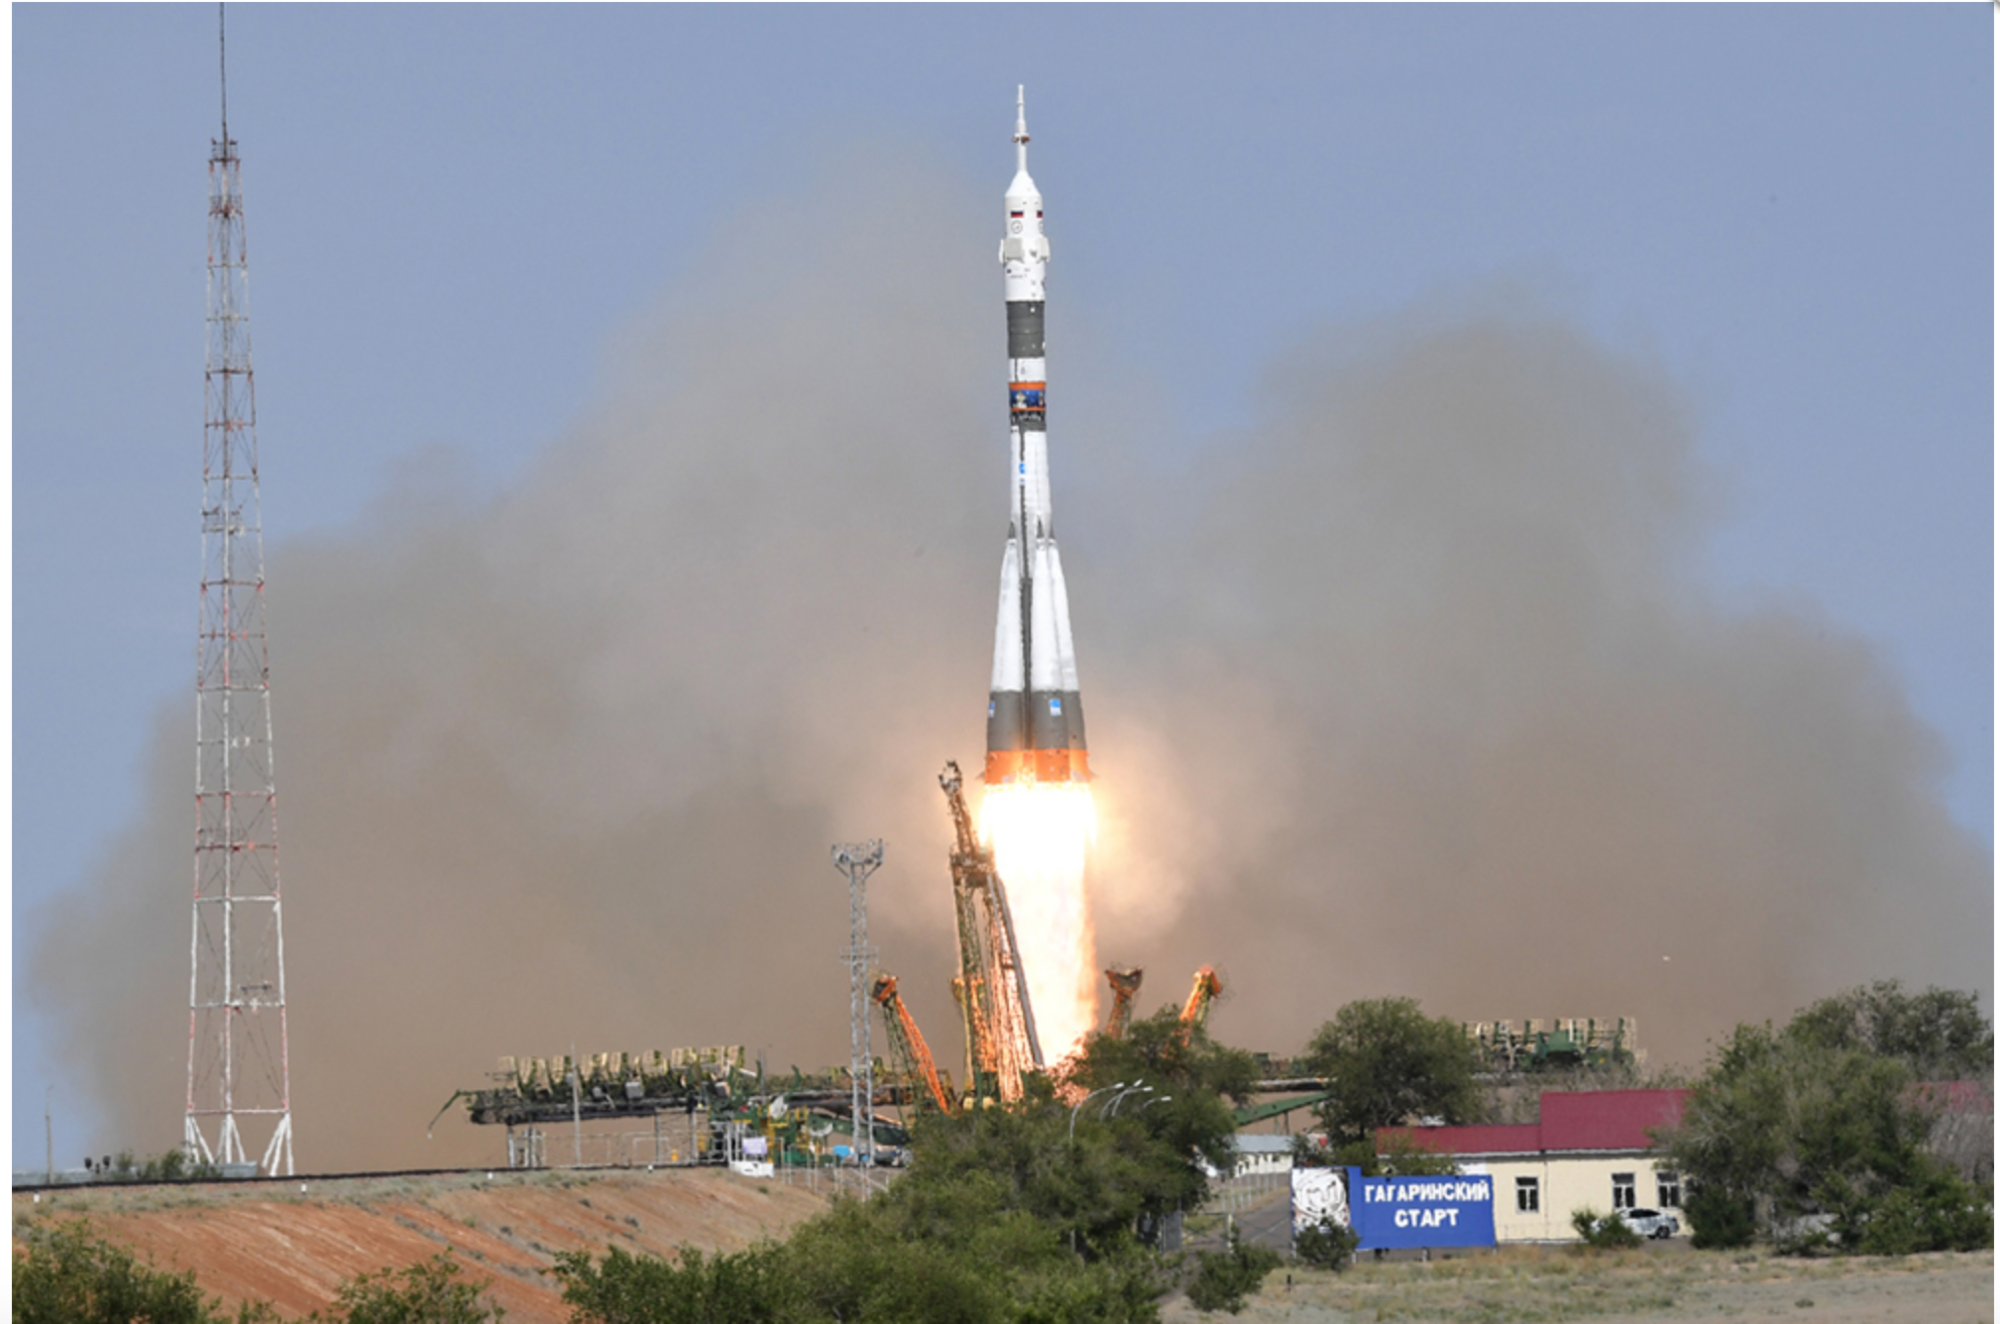 On June 6, 2018, the integrated launch vehicle Soyuz-FG carrying the manned transportation spacecraft Soyuz MS-09 with the ISS 56/57 Expedition crew was launched from Area No.1 (“Gagarin’s launch pad”) of the Baikonur Cosmodrome. Photo courtesy of SC ROSCOSMOS.